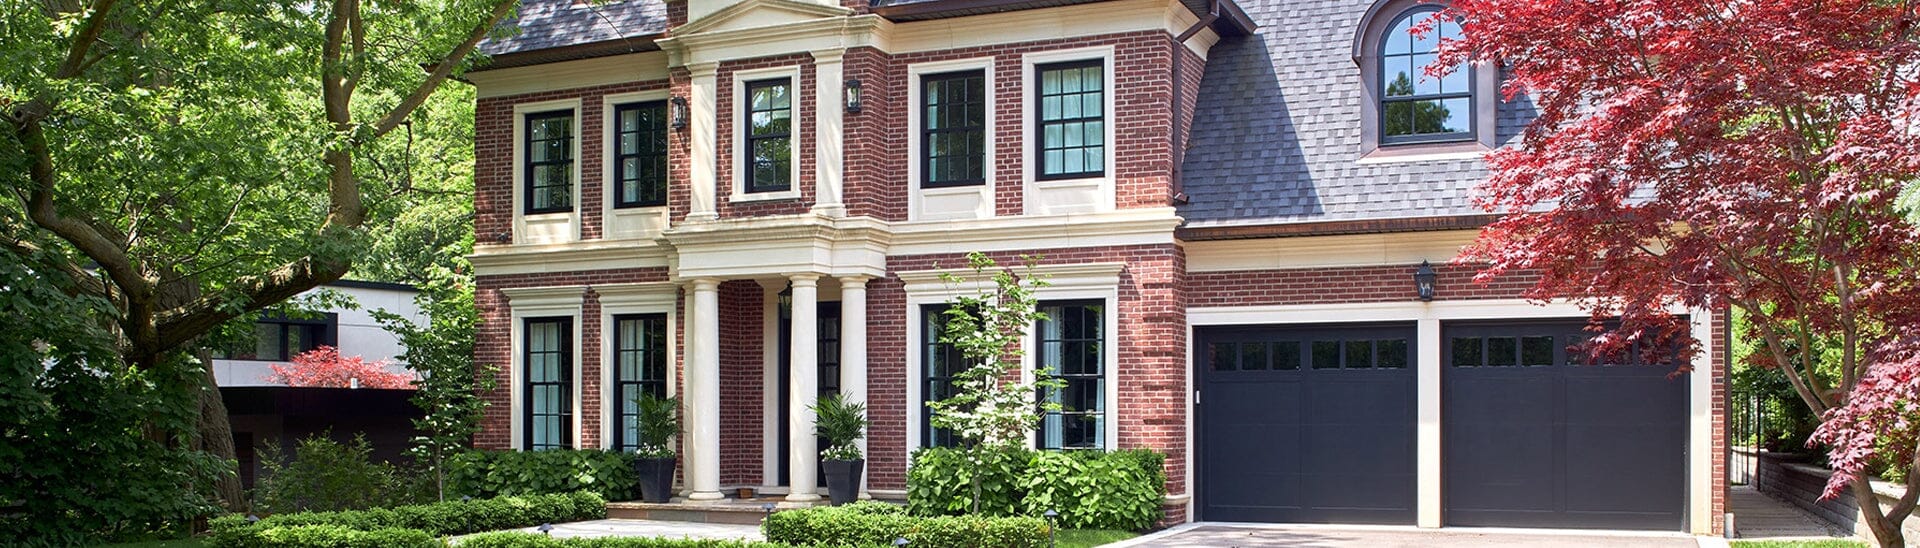 Enhancing Curb Appeal with Decorative Exterior House Trim